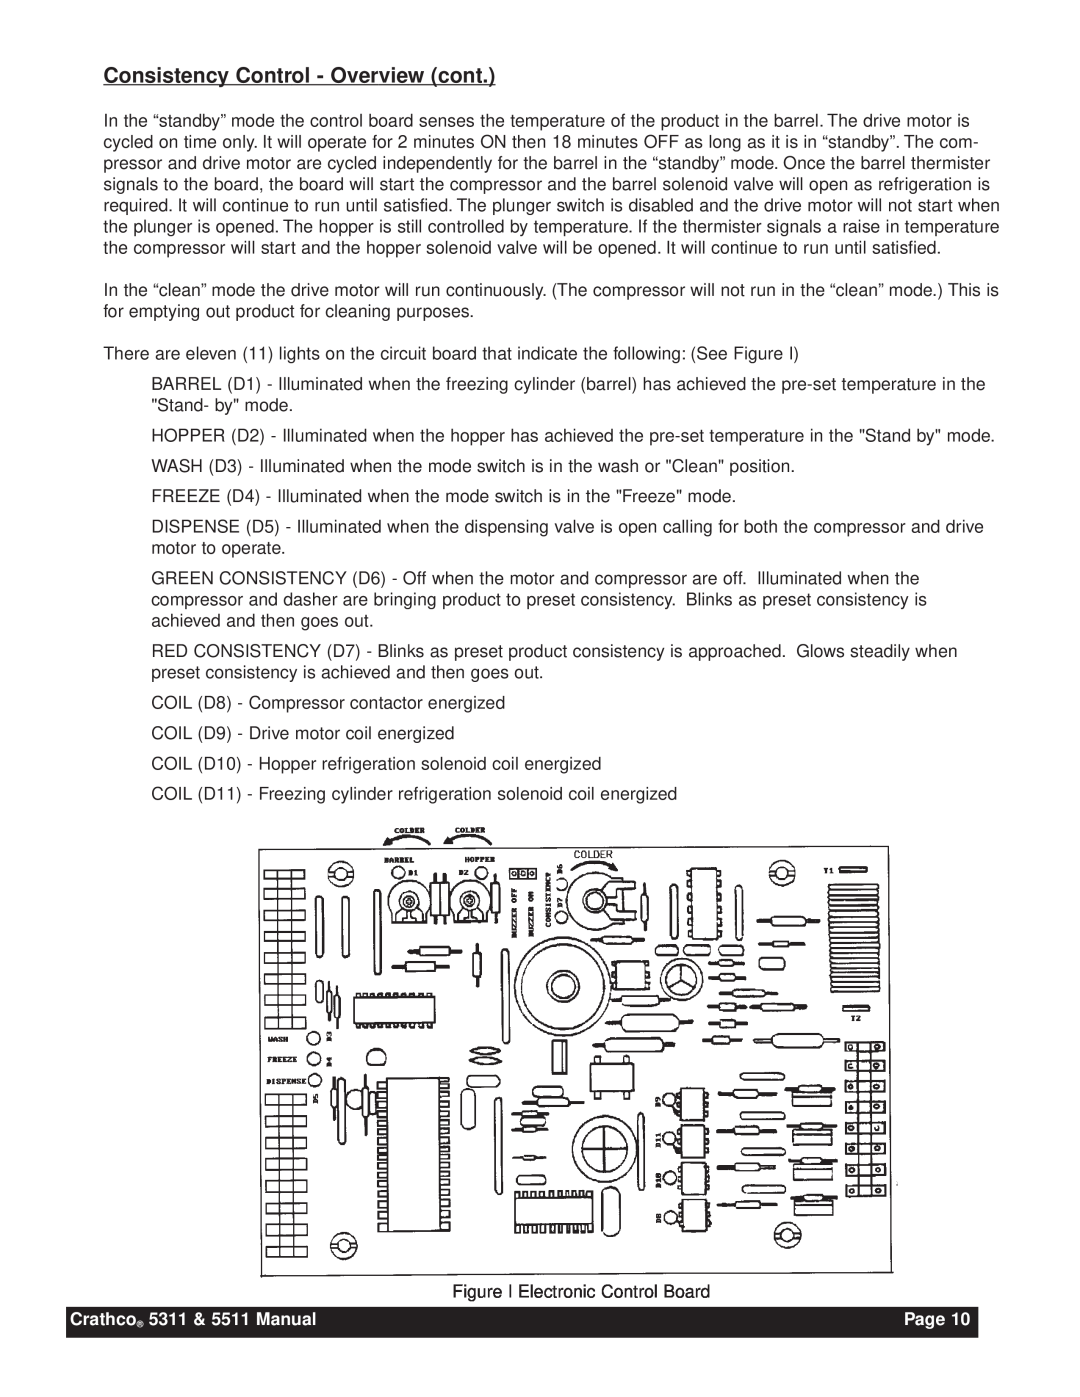 Grindmaster Consistency Control - Overview cont, Figure I Electronic Control Board, Crathco 5311 & 5511 Manual, Page 